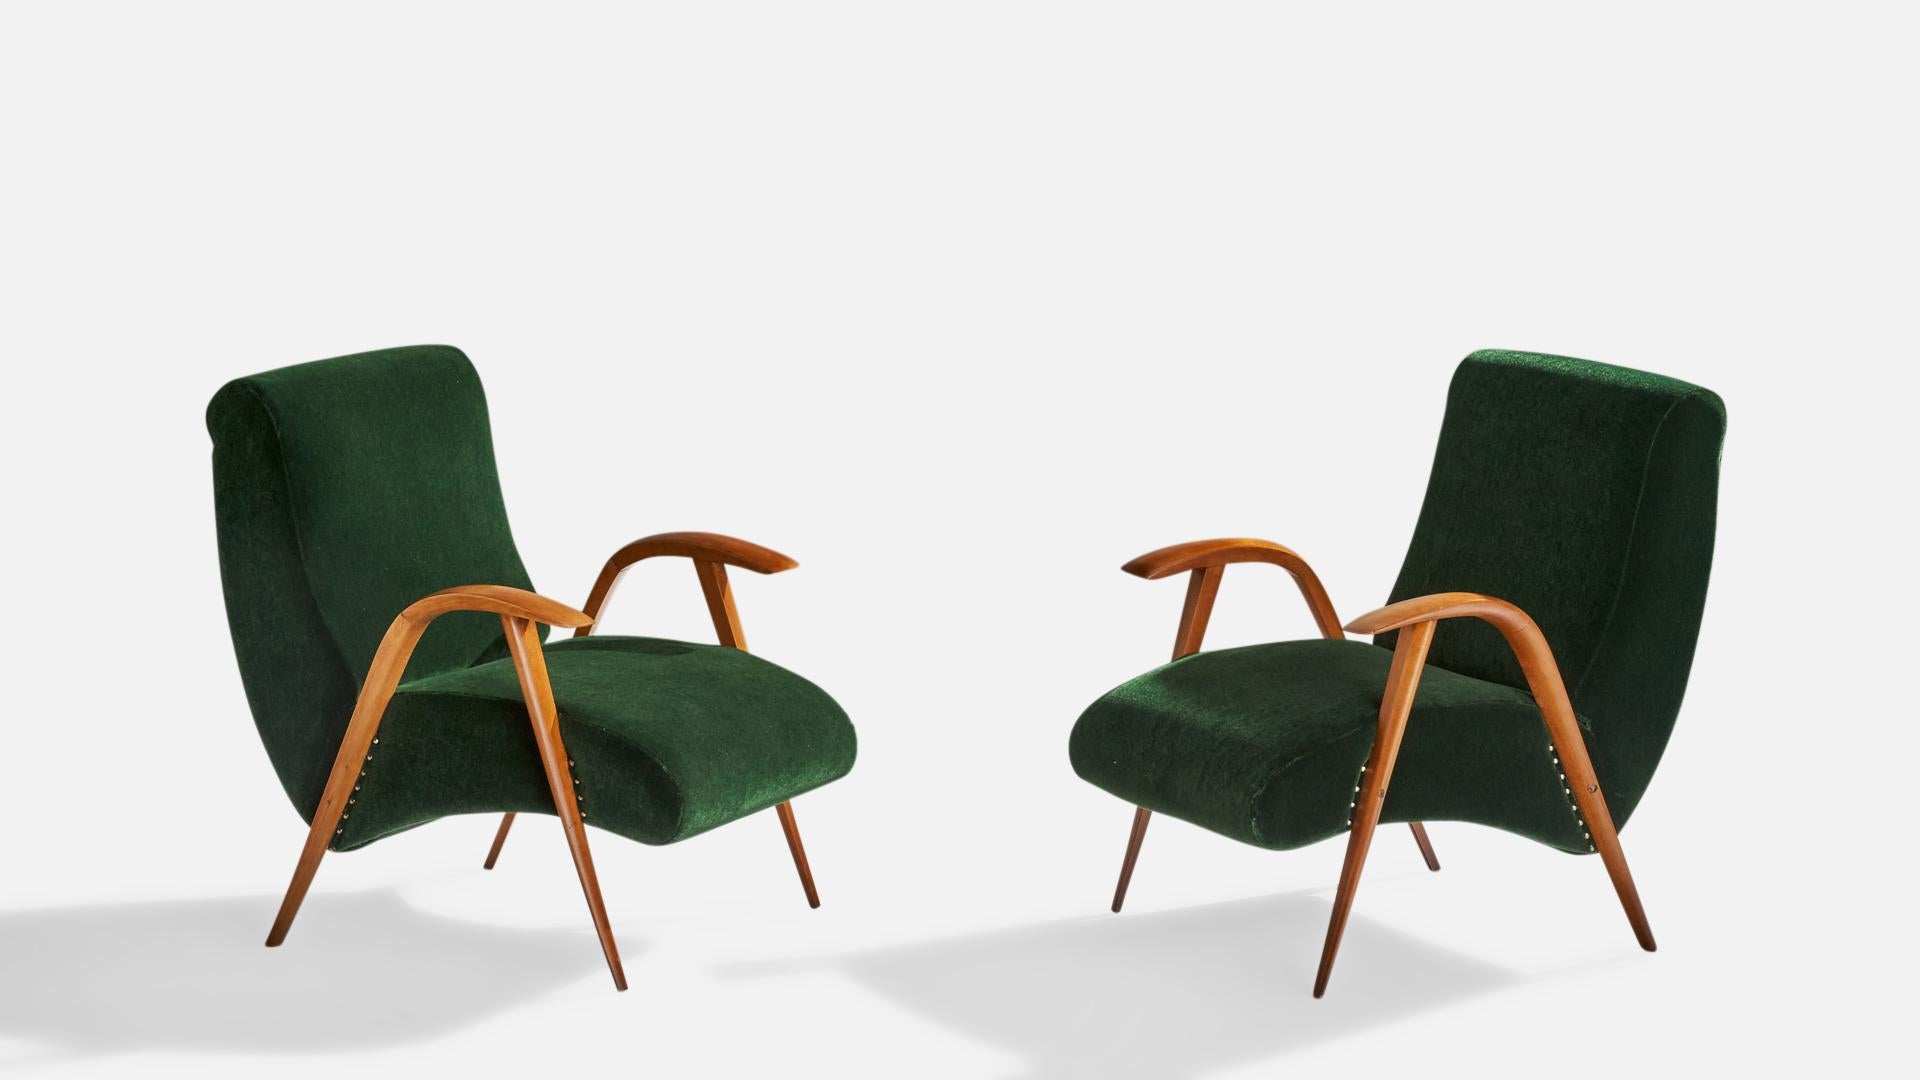 A pair of wood and green velvet lounge chairs designed and produced in Italy, 1940s.

Seat height: 14.18